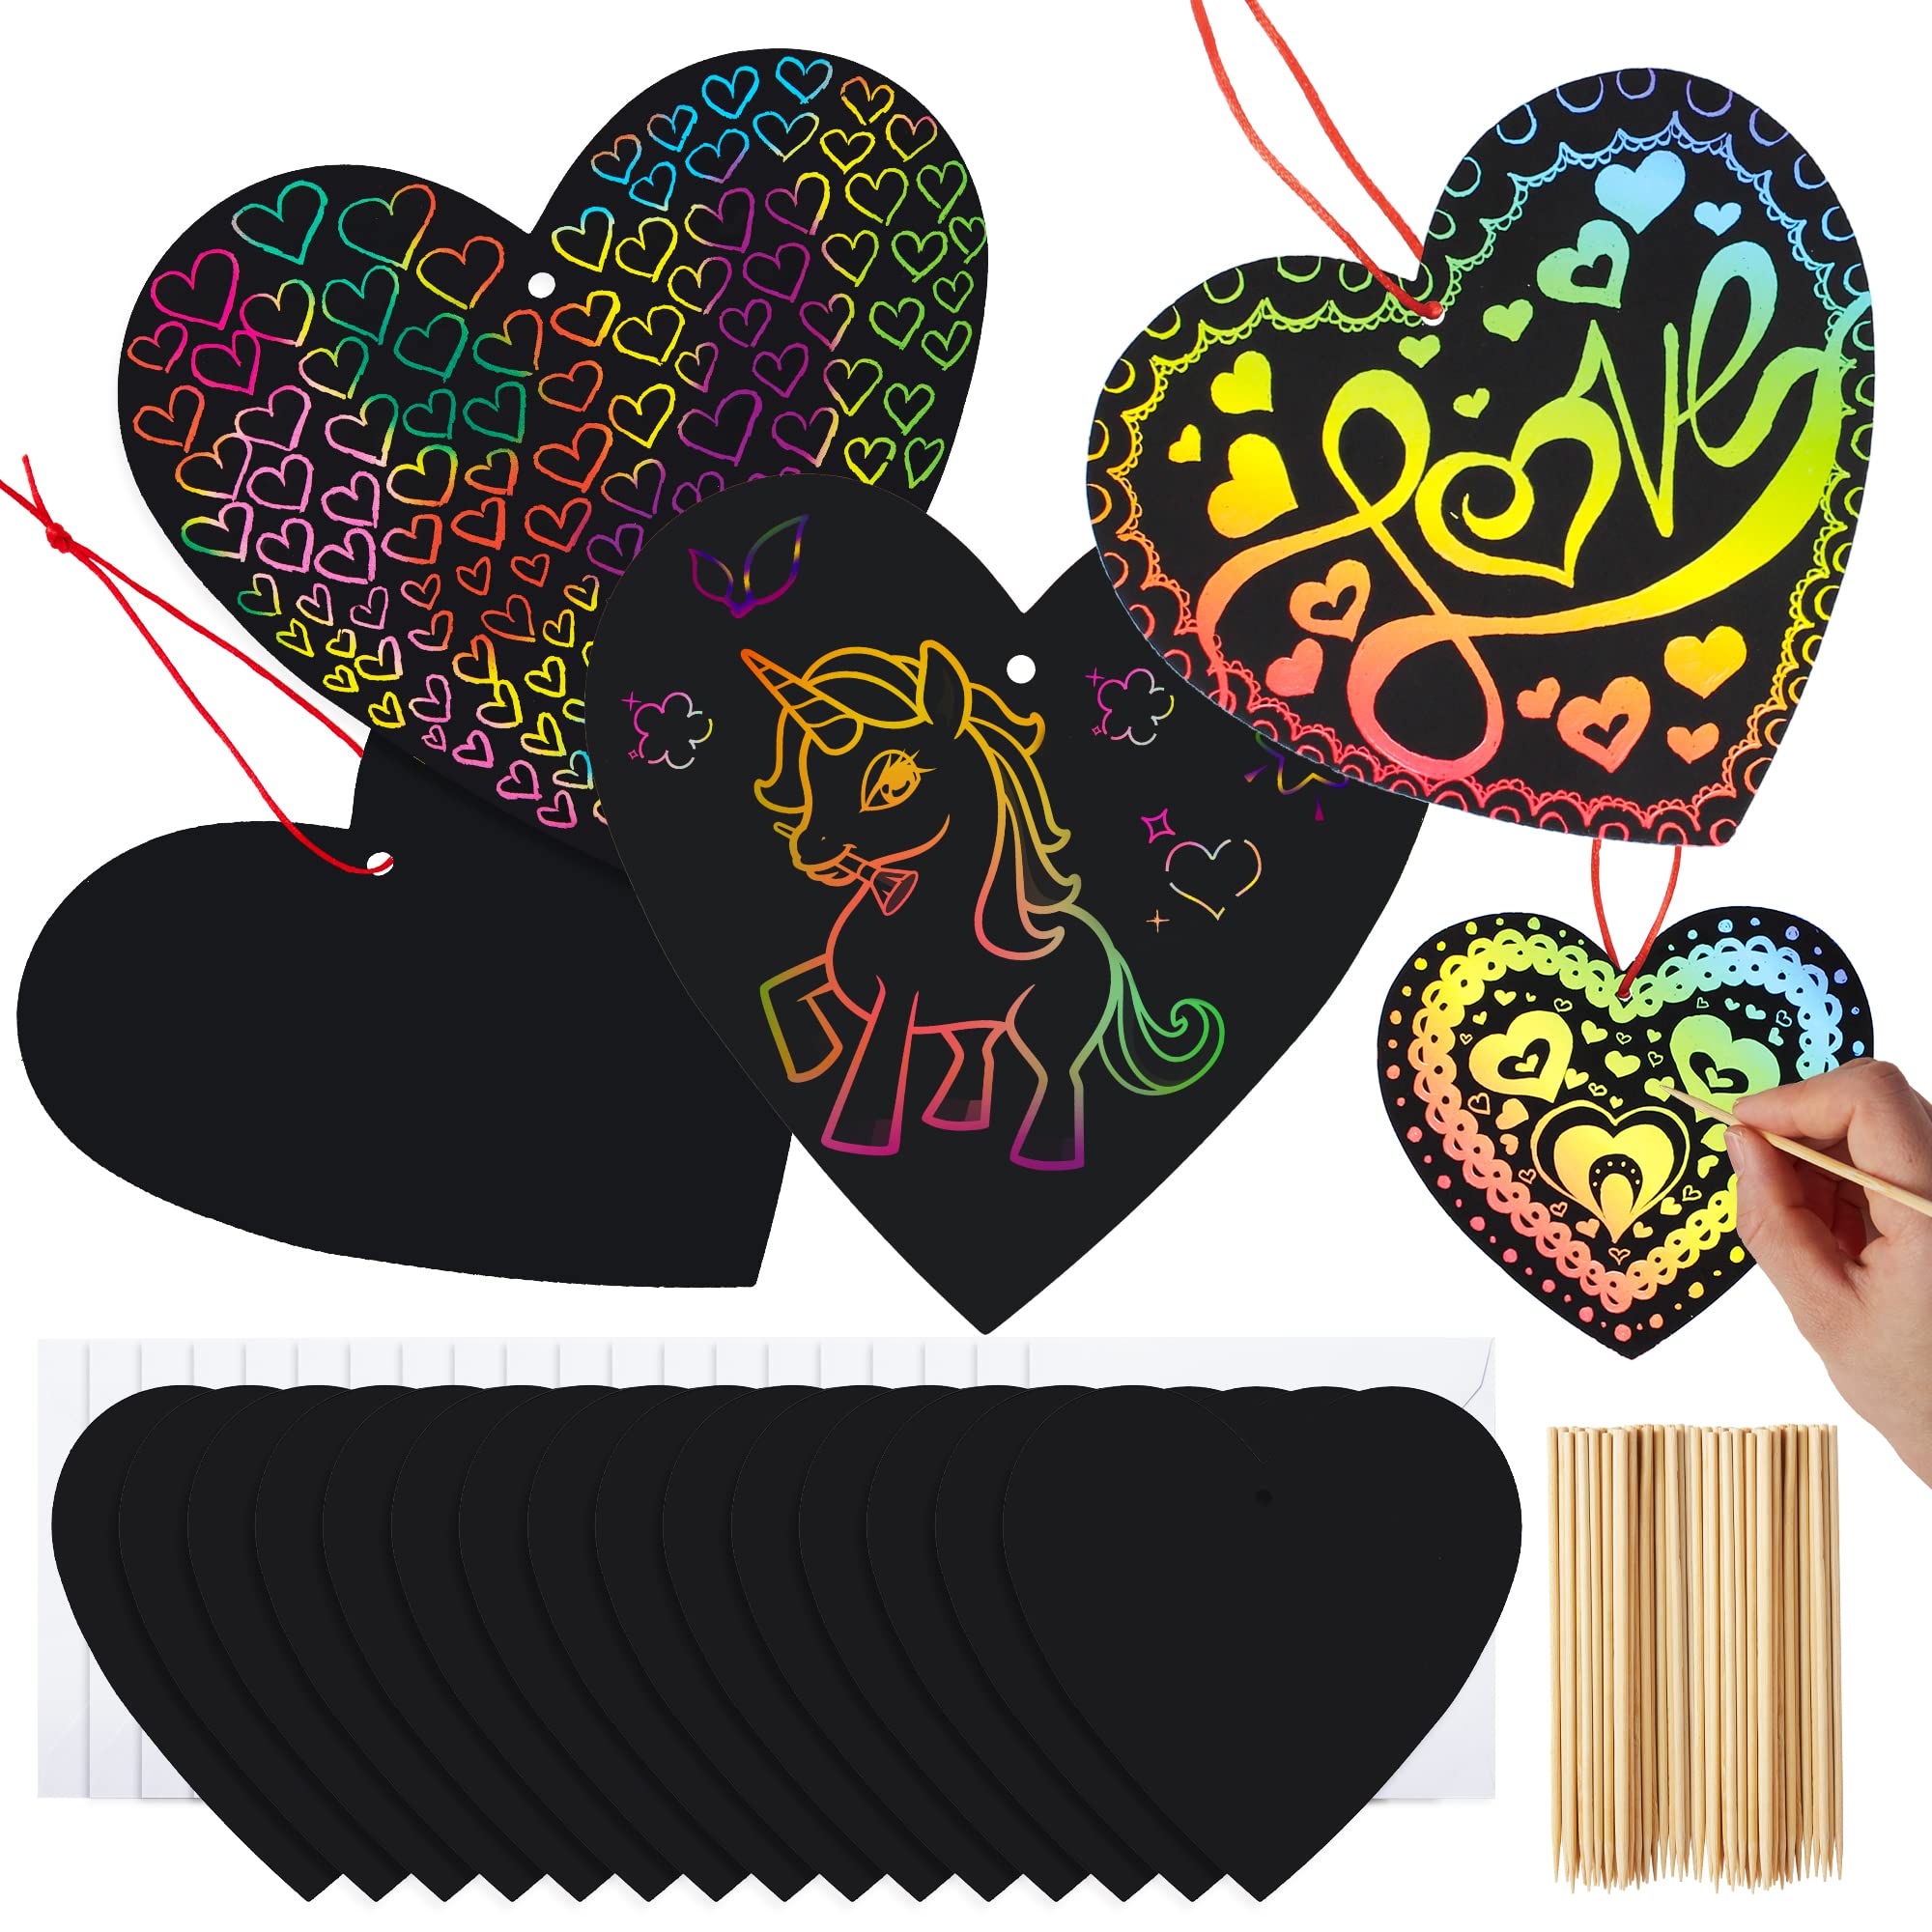 JOYIN 36 Packs Valentines Day Gifts Cards for Kids Magic Color Scratch Heart Rainbow Scratch Paper Heart Art Valentine Crafts & Art for Kids